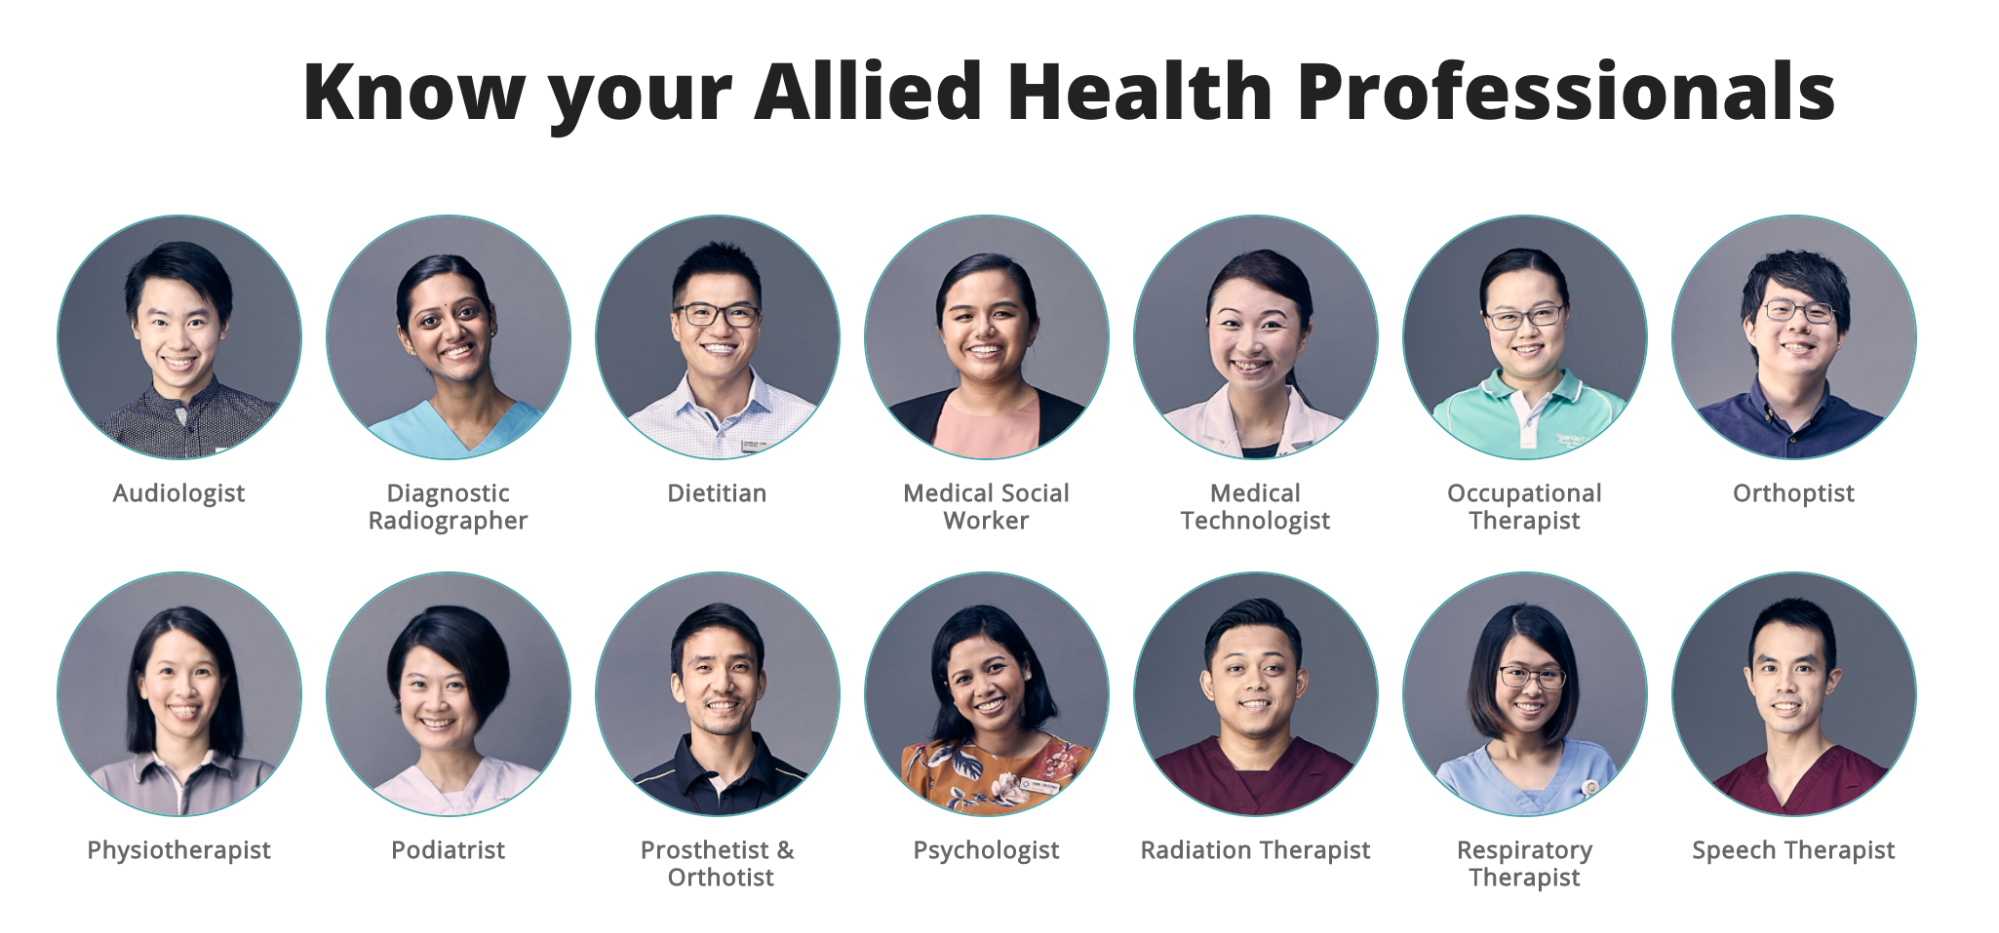 14 different vocations for allied health professionals (AHPs)